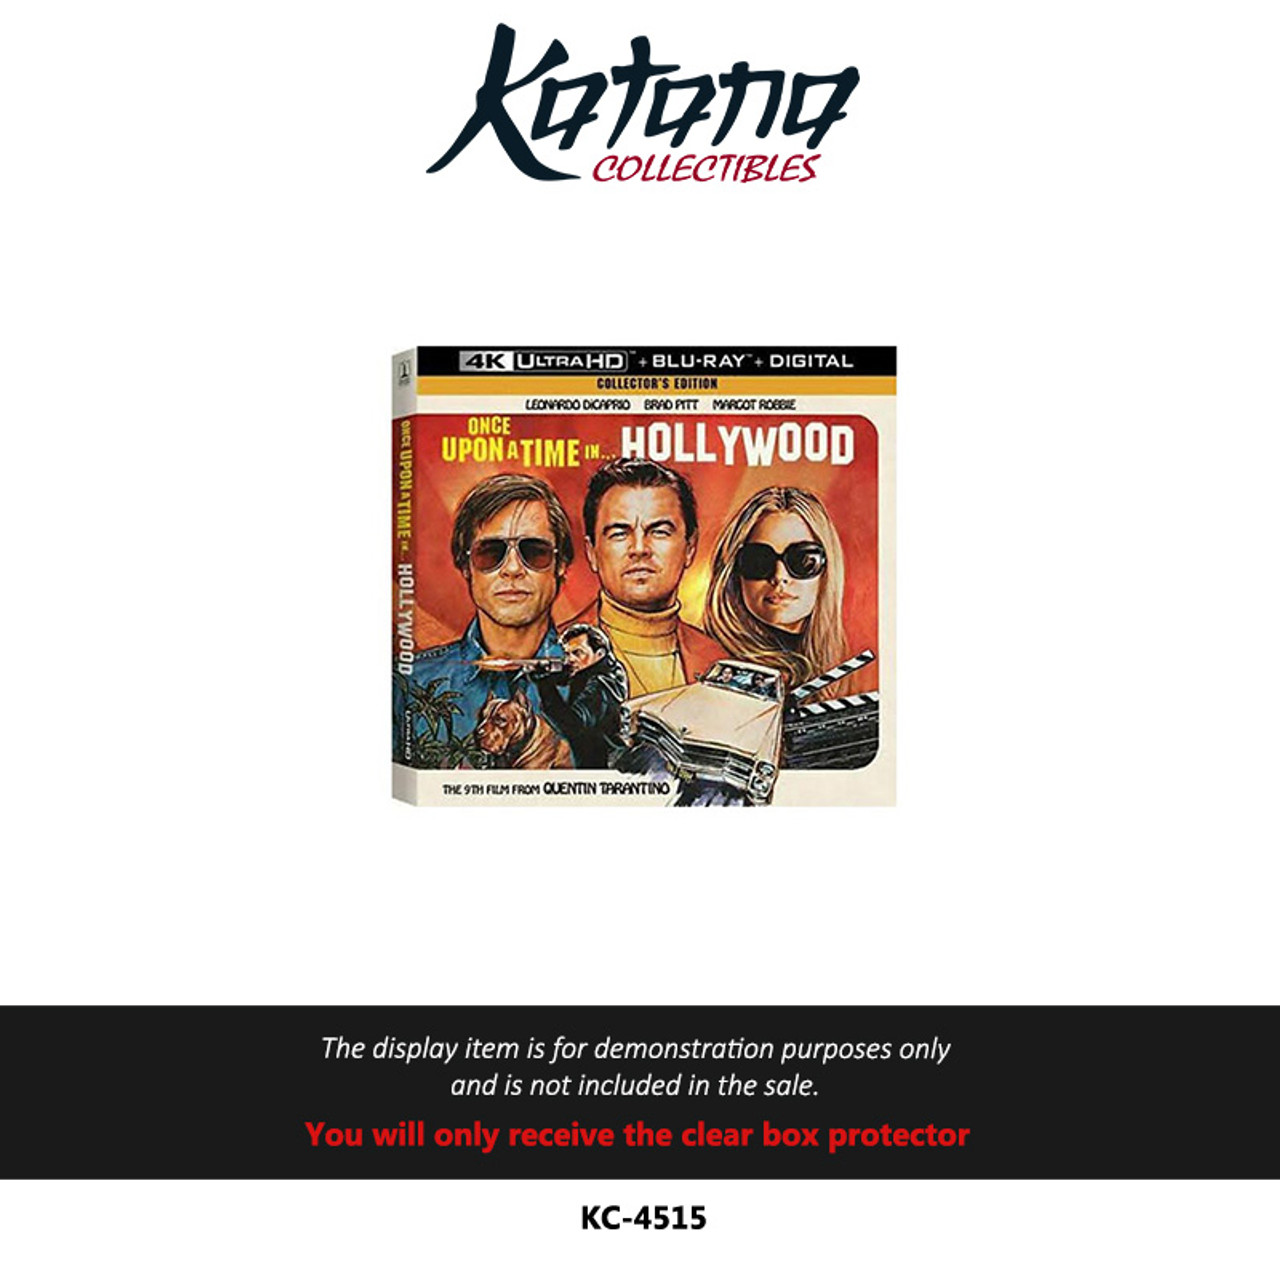 Katana Collectibles Protector For ONCE UPON A TIME IN HOLLYWOOD 4K Collector's Edition